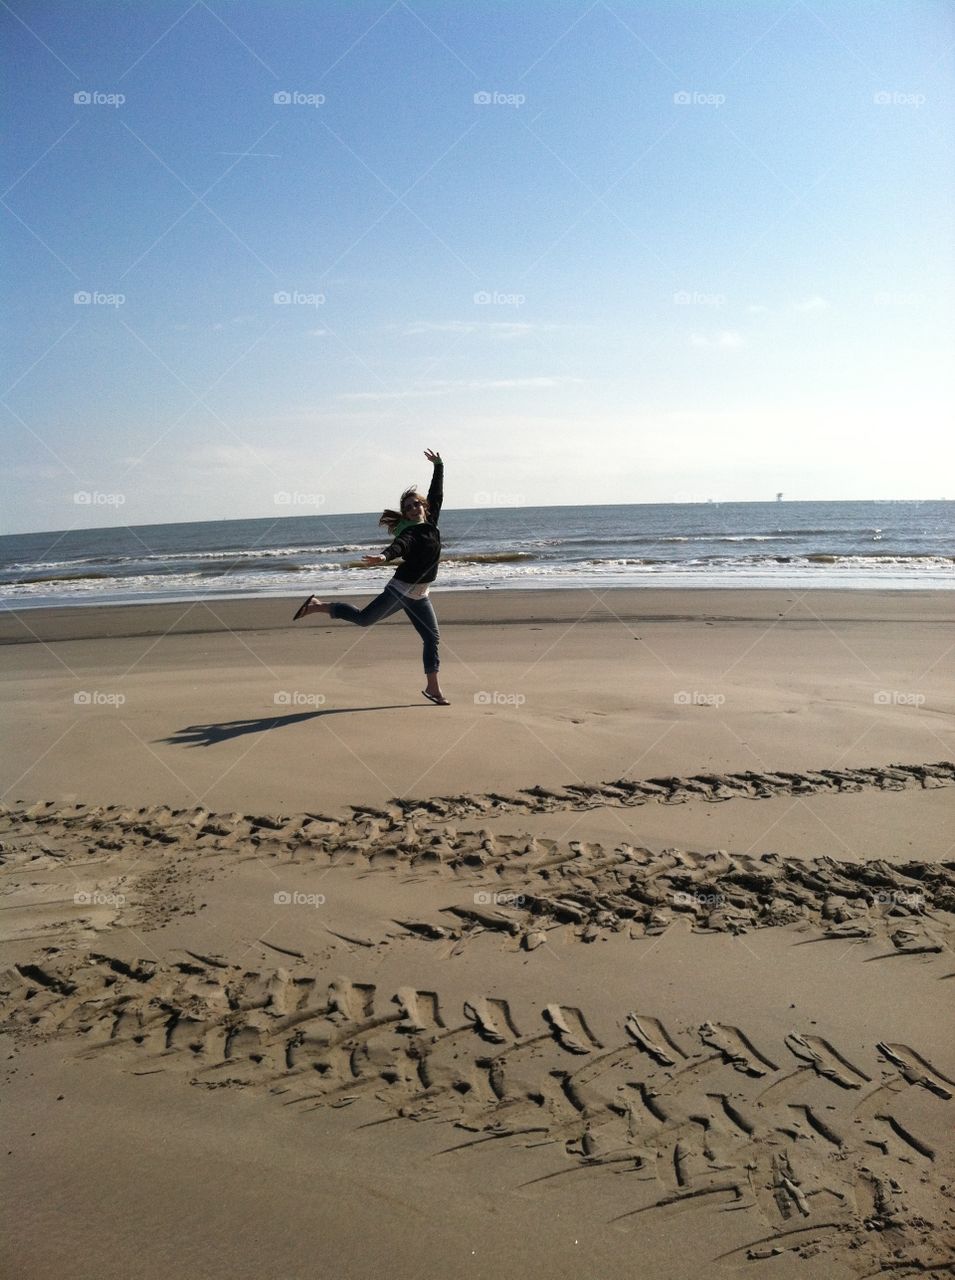 Woman jumping on the beach with tire tracks in the sand